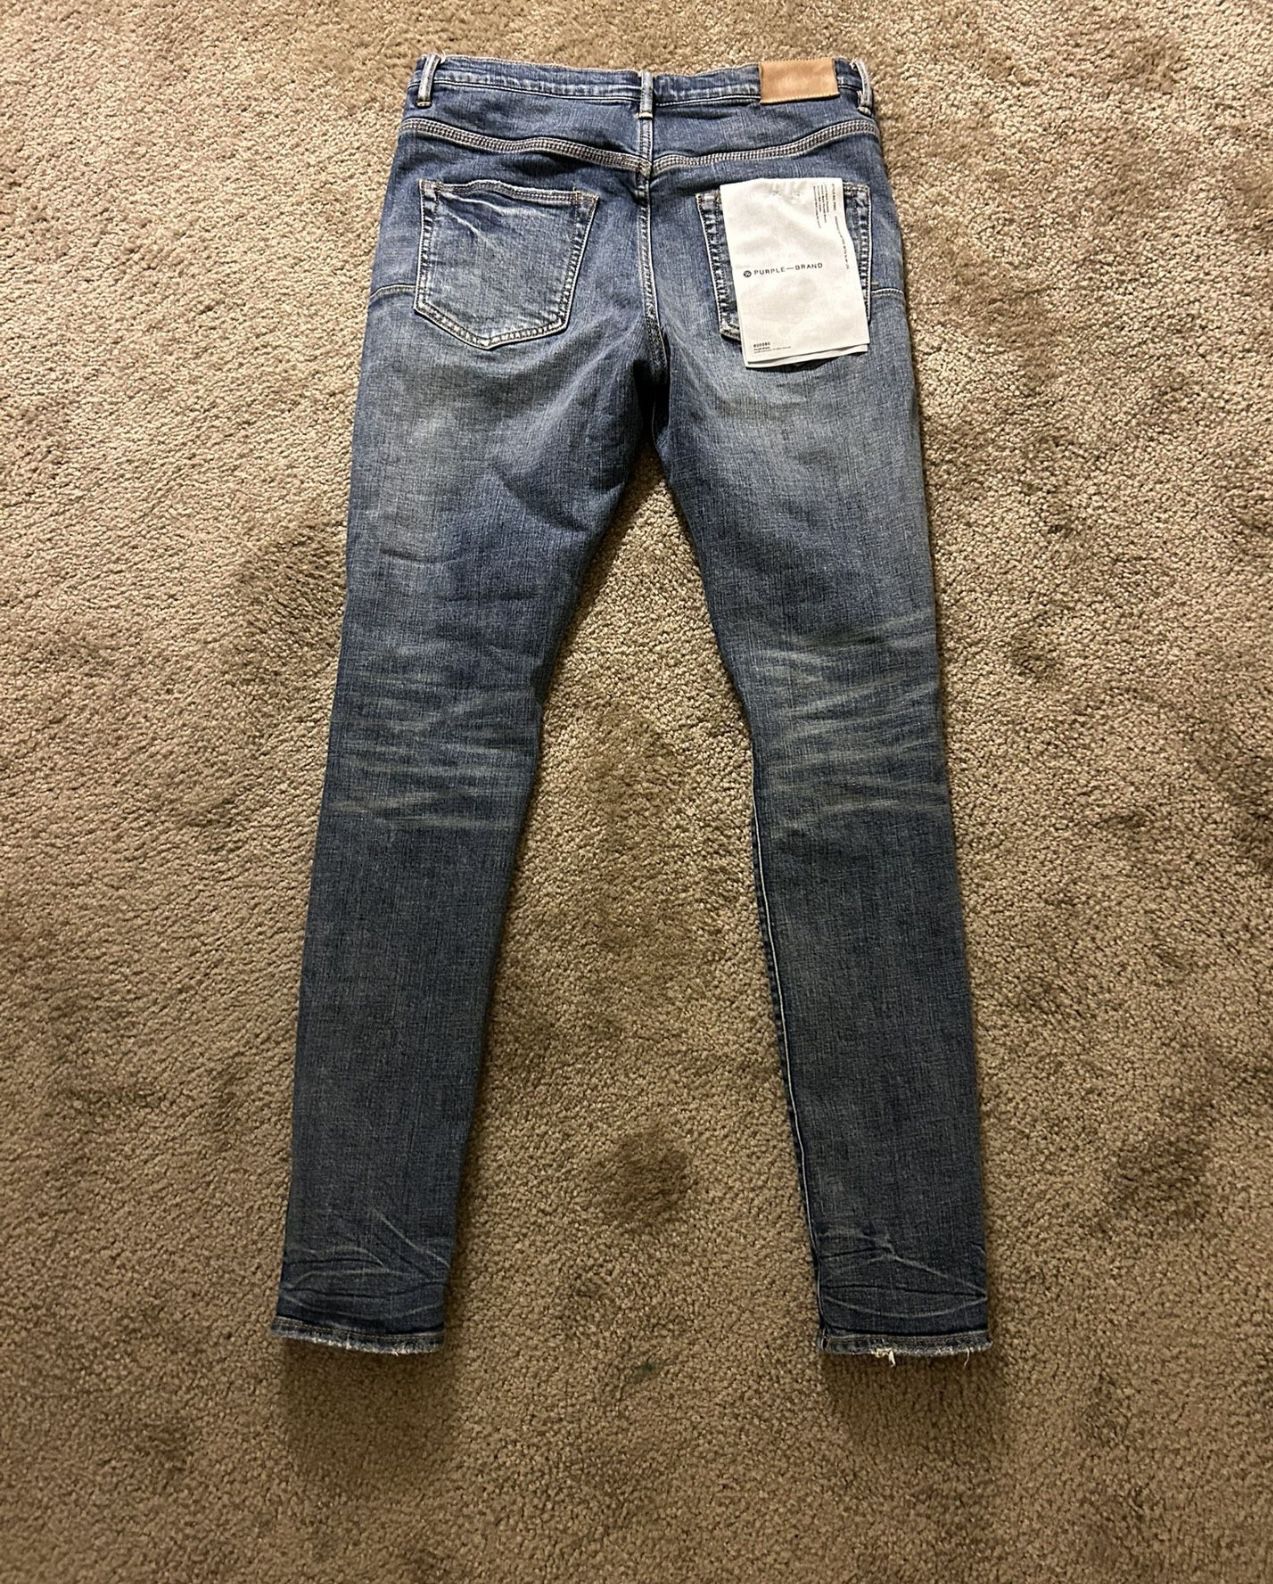 Purple Jeans for Sale in North Las Vegas, NV - OfferUp